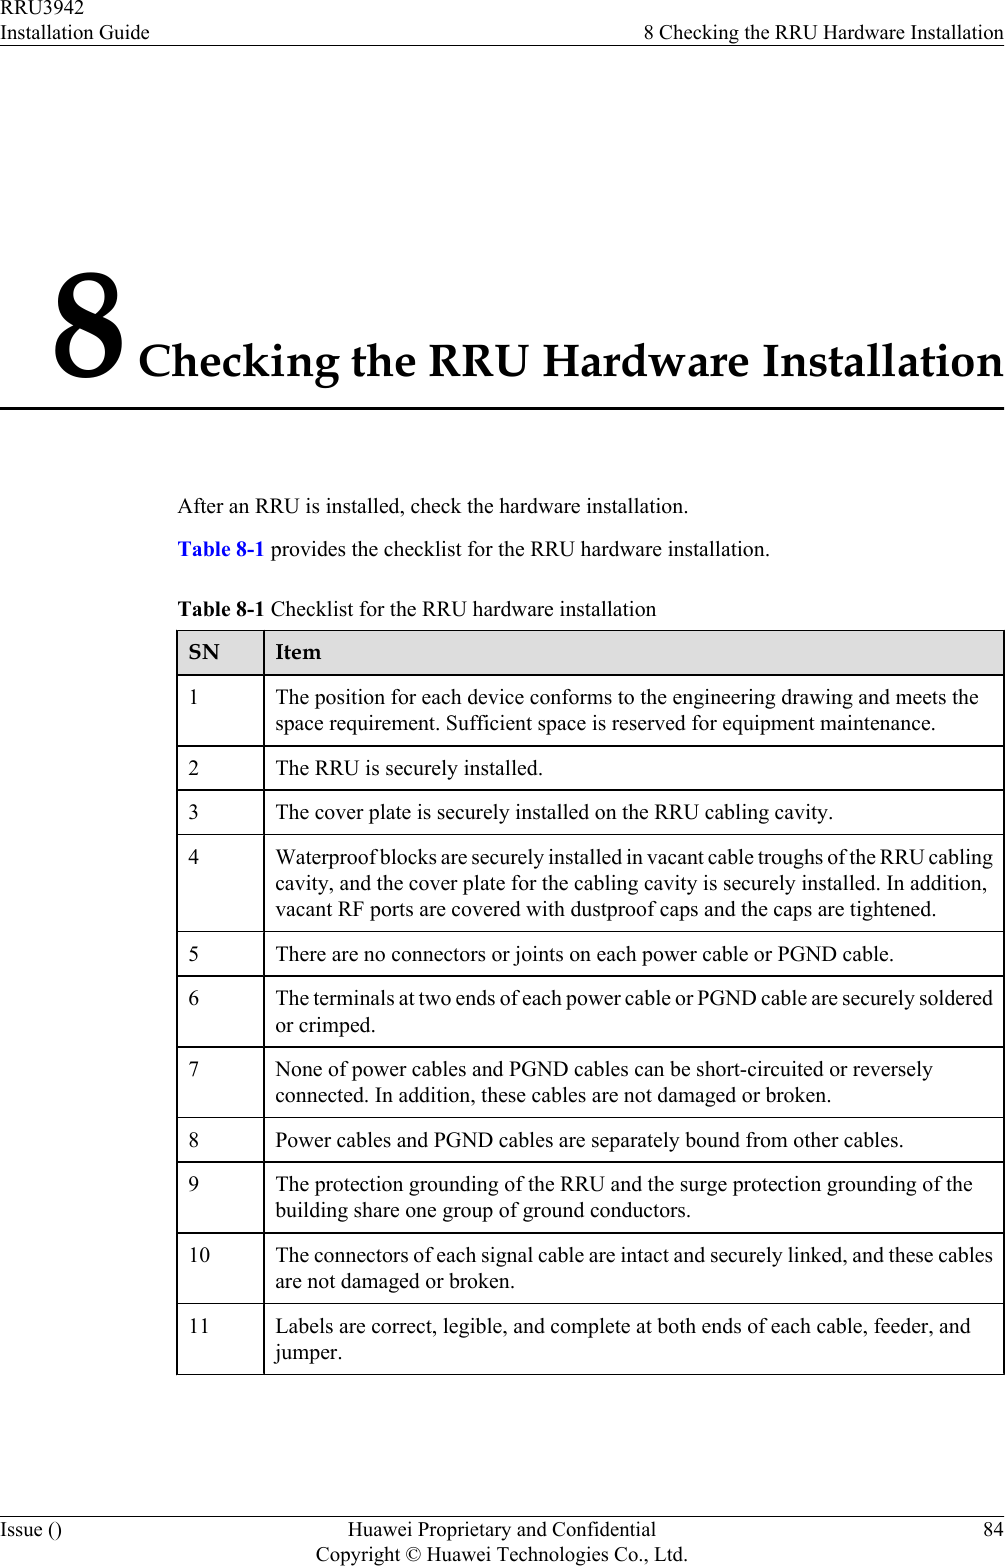 8 Checking the RRU Hardware InstallationAfter an RRU is installed, check the hardware installation.Table 8-1 provides the checklist for the RRU hardware installation.Table 8-1 Checklist for the RRU hardware installationSN Item1The position for each device conforms to the engineering drawing and meets thespace requirement. Sufficient space is reserved for equipment maintenance.2 The RRU is securely installed.3 The cover plate is securely installed on the RRU cabling cavity.4 Waterproof blocks are securely installed in vacant cable troughs of the RRU cablingcavity, and the cover plate for the cabling cavity is securely installed. In addition,vacant RF ports are covered with dustproof caps and the caps are tightened.5 There are no connectors or joints on each power cable or PGND cable.6 The terminals at two ends of each power cable or PGND cable are securely solderedor crimped.7 None of power cables and PGND cables can be short-circuited or reverselyconnected. In addition, these cables are not damaged or broken.8 Power cables and PGND cables are separately bound from other cables.9 The protection grounding of the RRU and the surge protection grounding of thebuilding share one group of ground conductors.10 The connectors of each signal cable are intact and securely linked, and these cablesare not damaged or broken.11 Labels are correct, legible, and complete at both ends of each cable, feeder, andjumper.RRU3942Installation Guide 8 Checking the RRU Hardware InstallationIssue () Huawei Proprietary and ConfidentialCopyright © Huawei Technologies Co., Ltd.84